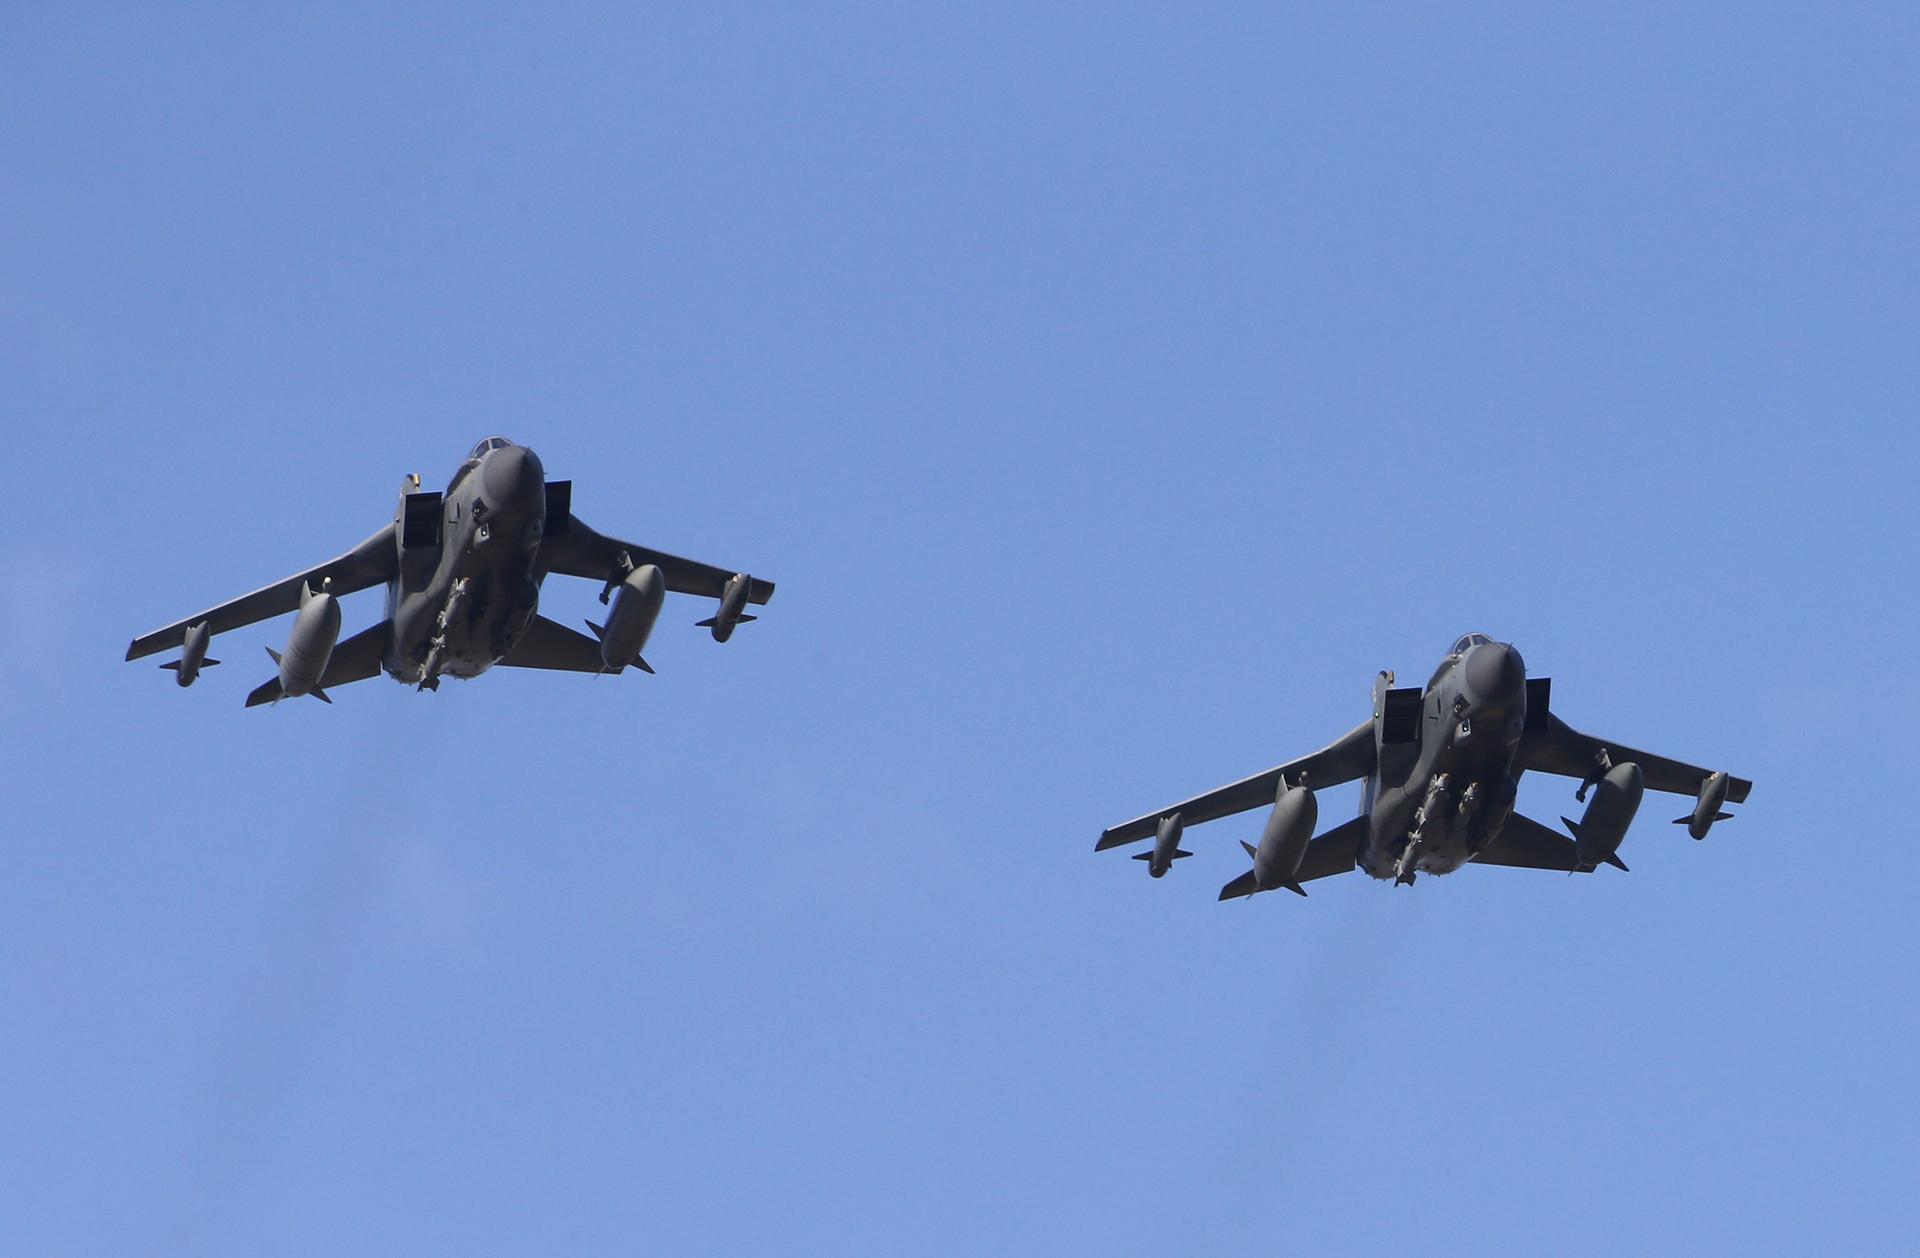 Two British Tornados make a fly past before landing after returning from a mission, at RAF Akrotiri, southern Cyprus December 3, 2015.